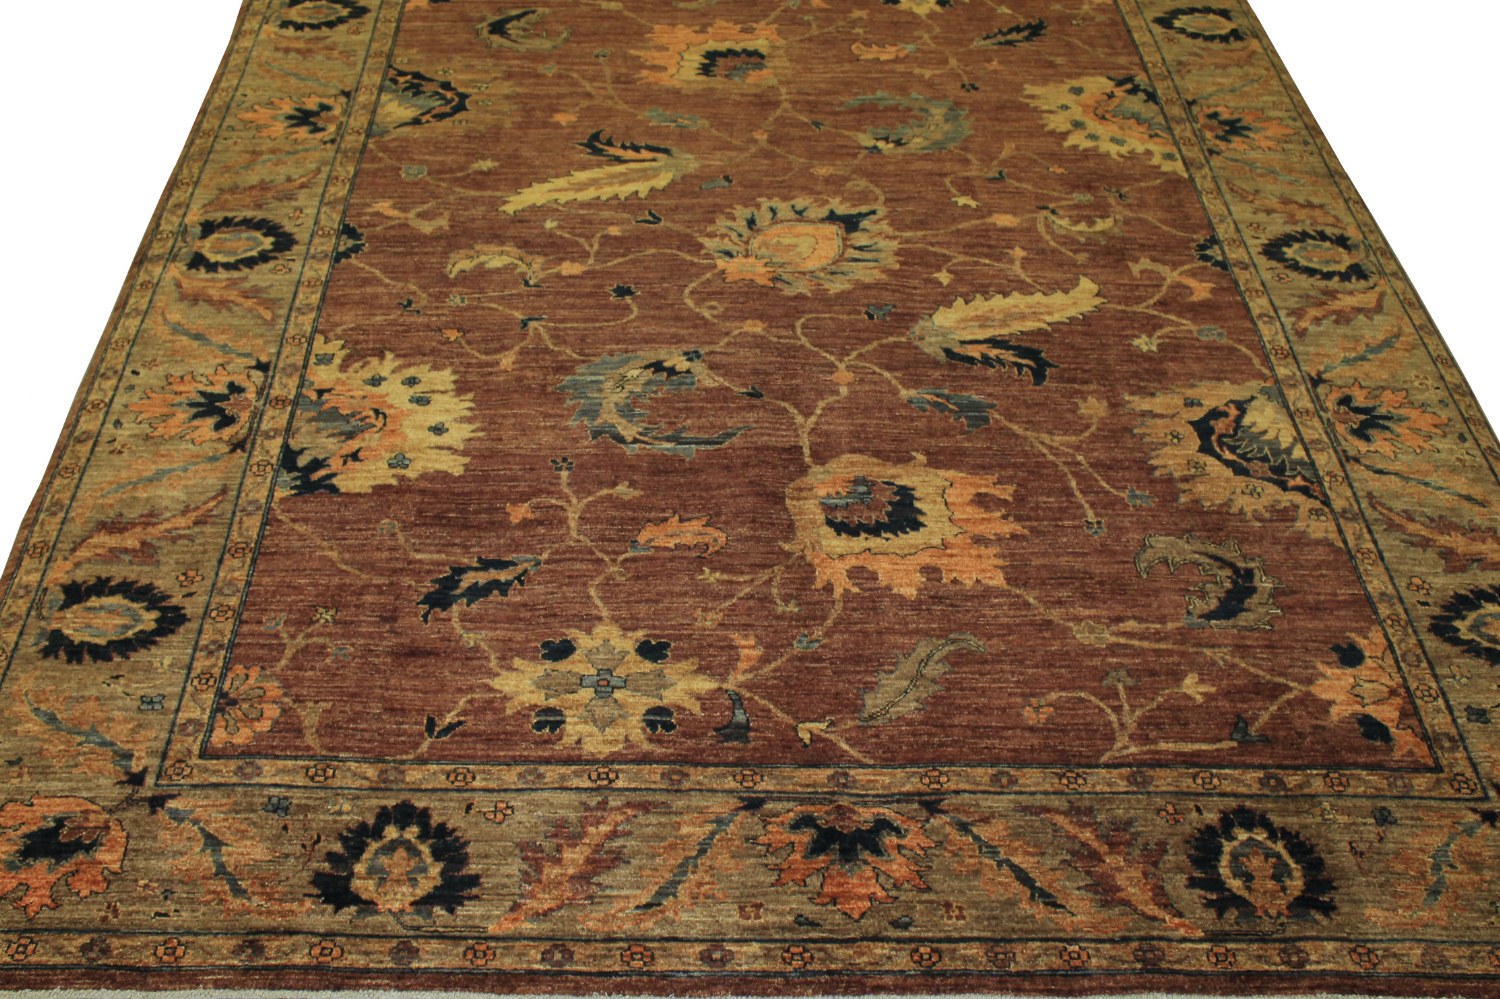 9x12 Antique Revival Hand Knotted Wool Area Rug - MR12409